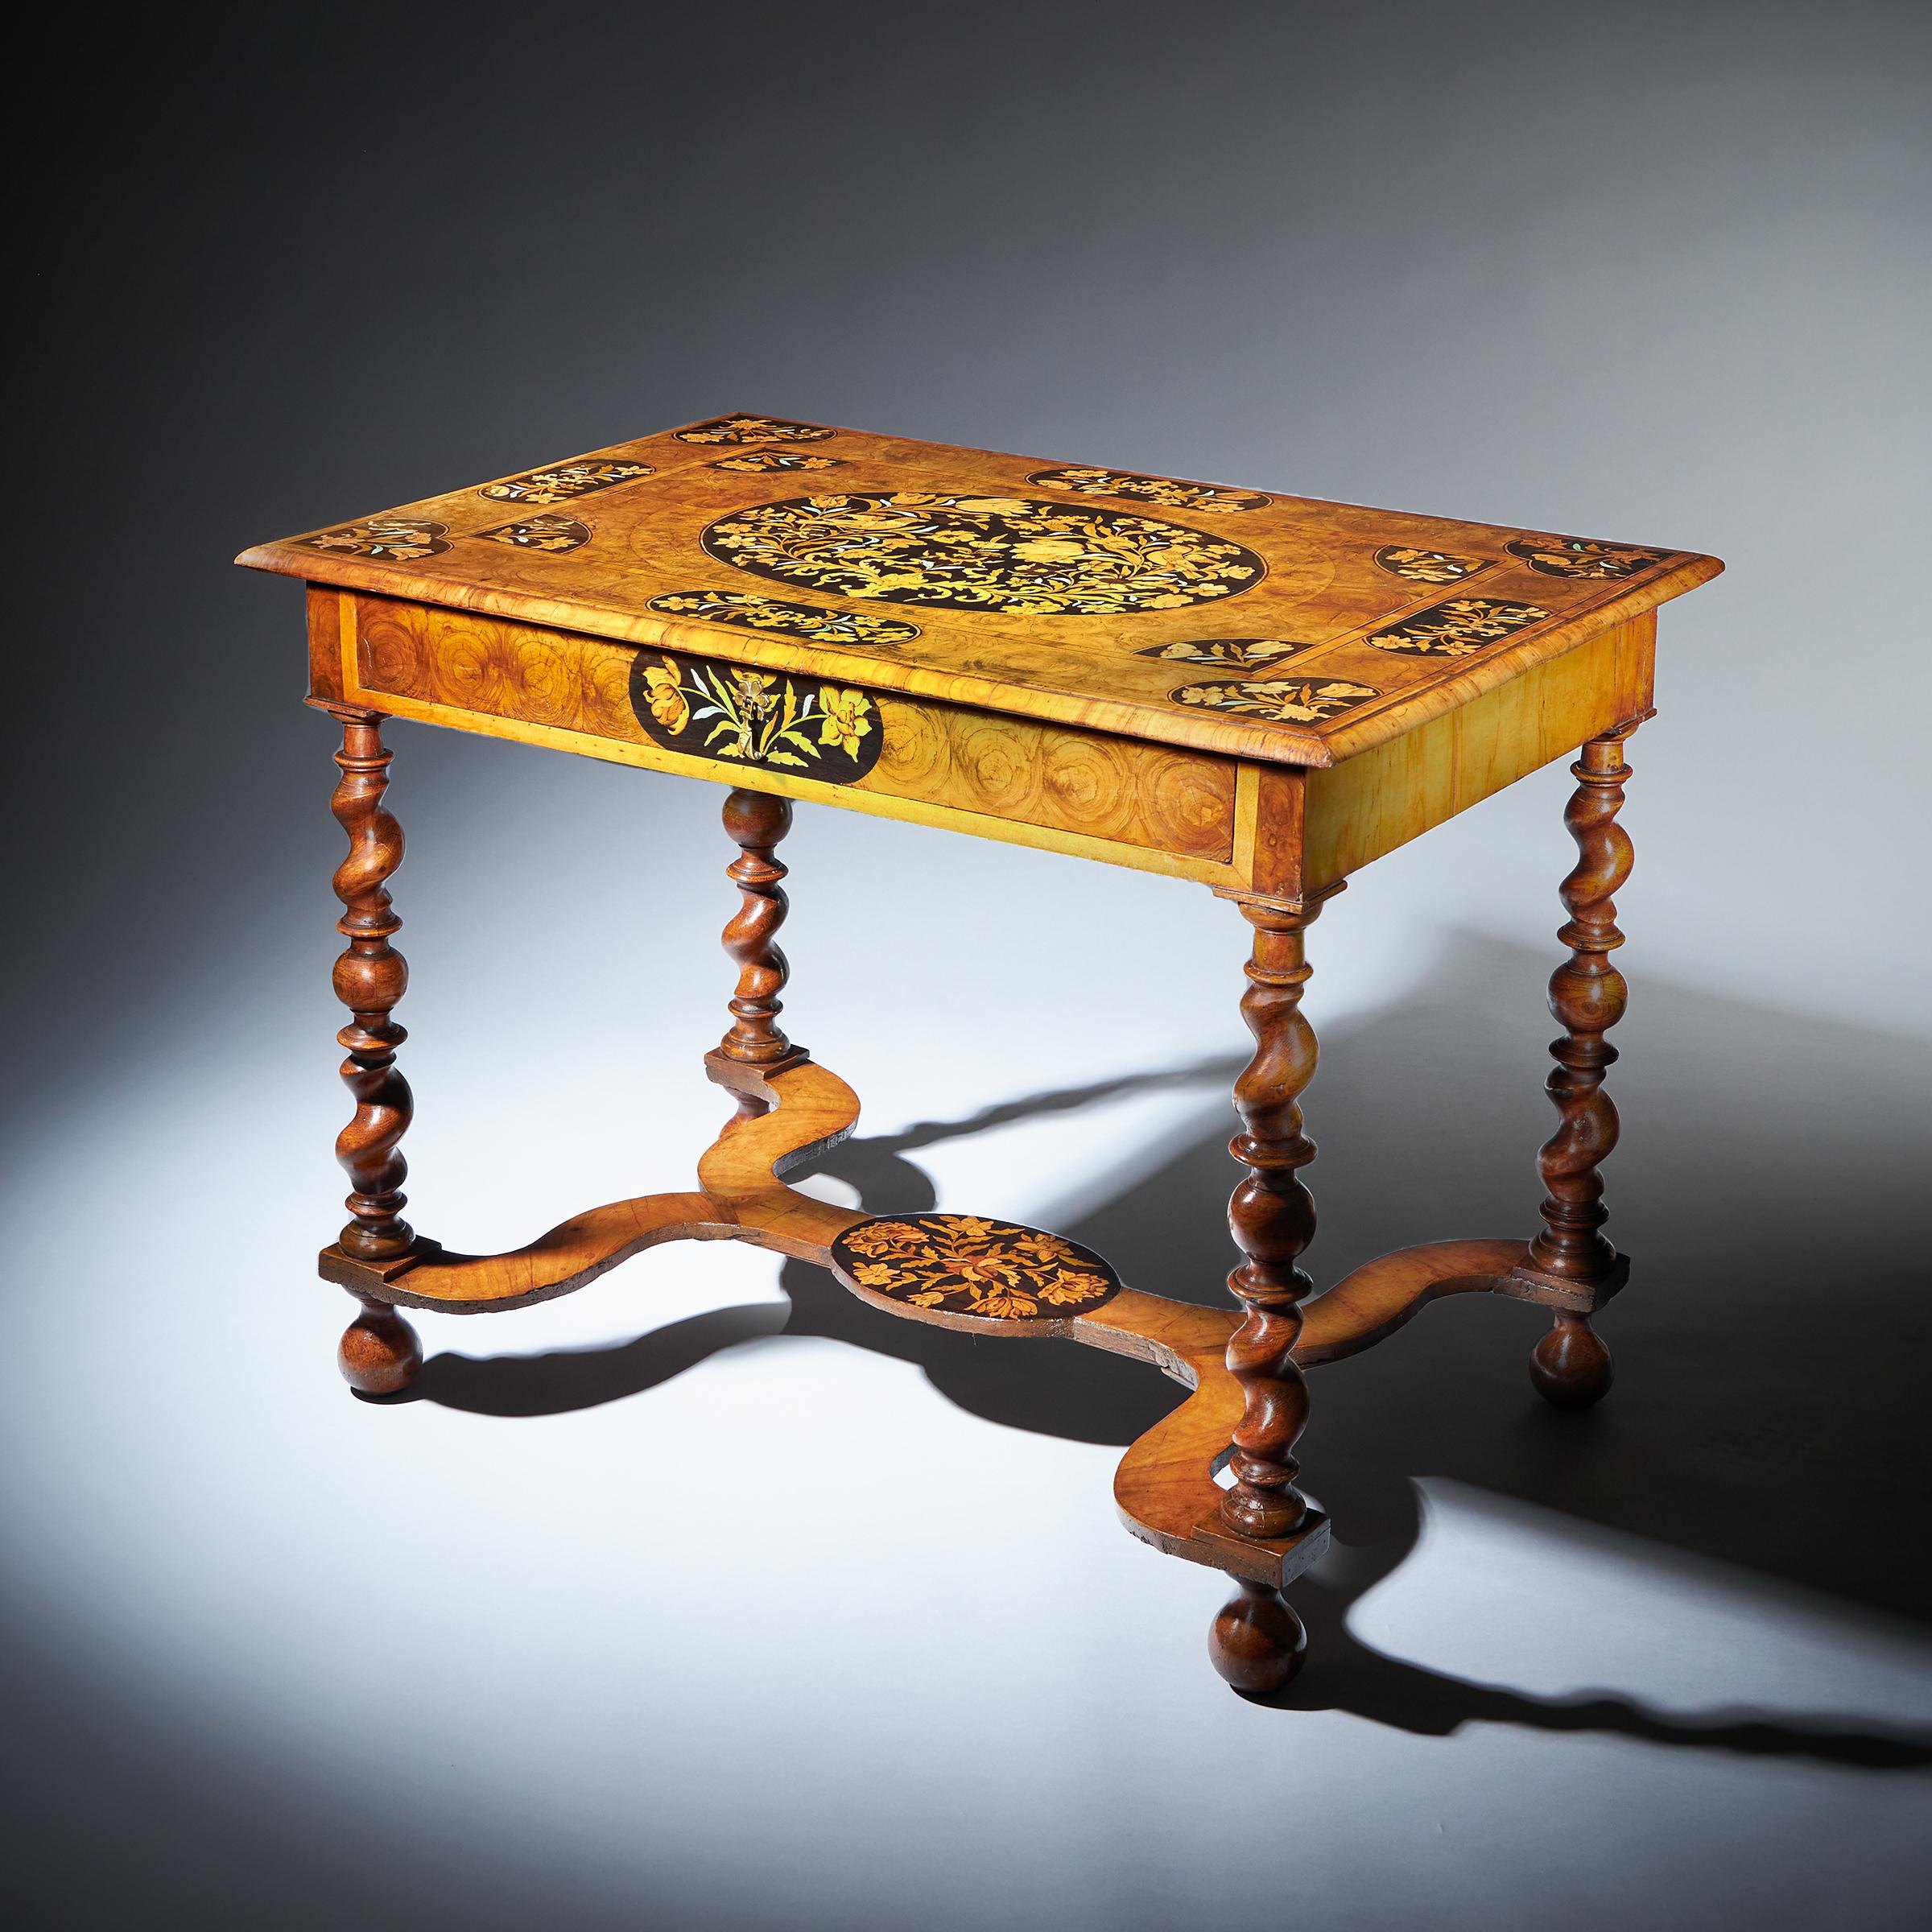 Floral marquetry inlaid olive oyster and ebony side table, attributed to Gerrit Jensen (fl.1667-1715), London, circa 1680. Incorporating Olive Oyster, ebony, stained bone, holly, figured olive walnut and tulip. The rectangular top is inlaid with a